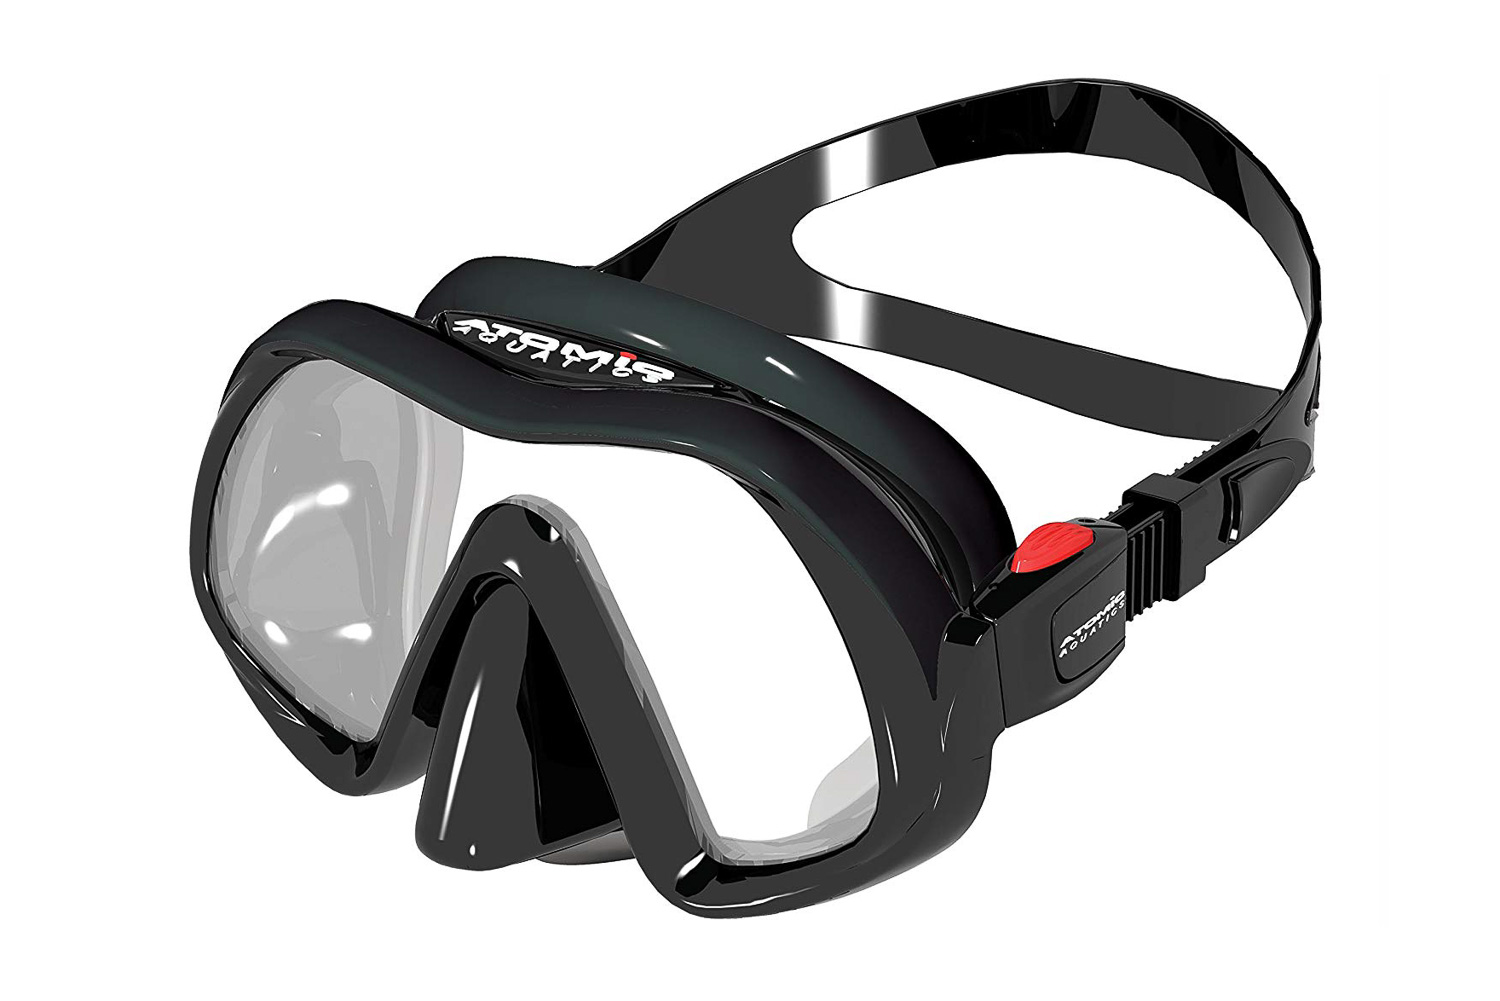 The Best Snorkeling Gear for 2023 I Arctic Adventures